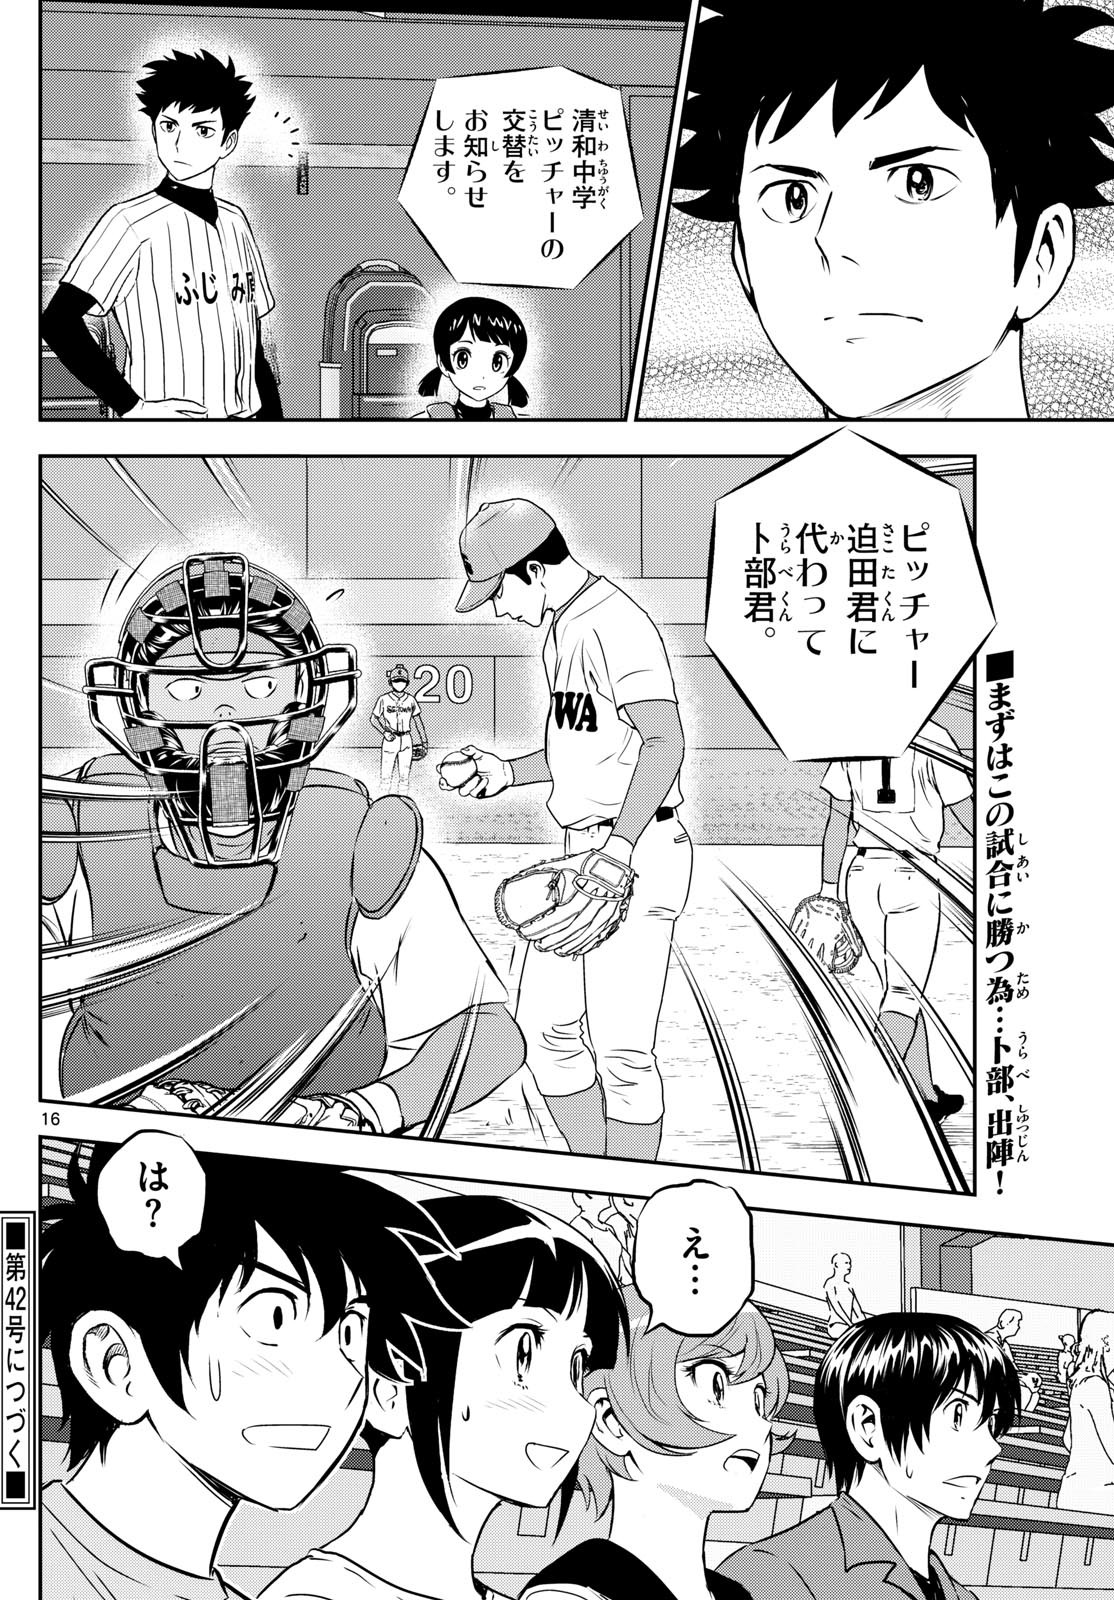 Major 2nd - メジャーセカンド - Chapter 262 - Page 16